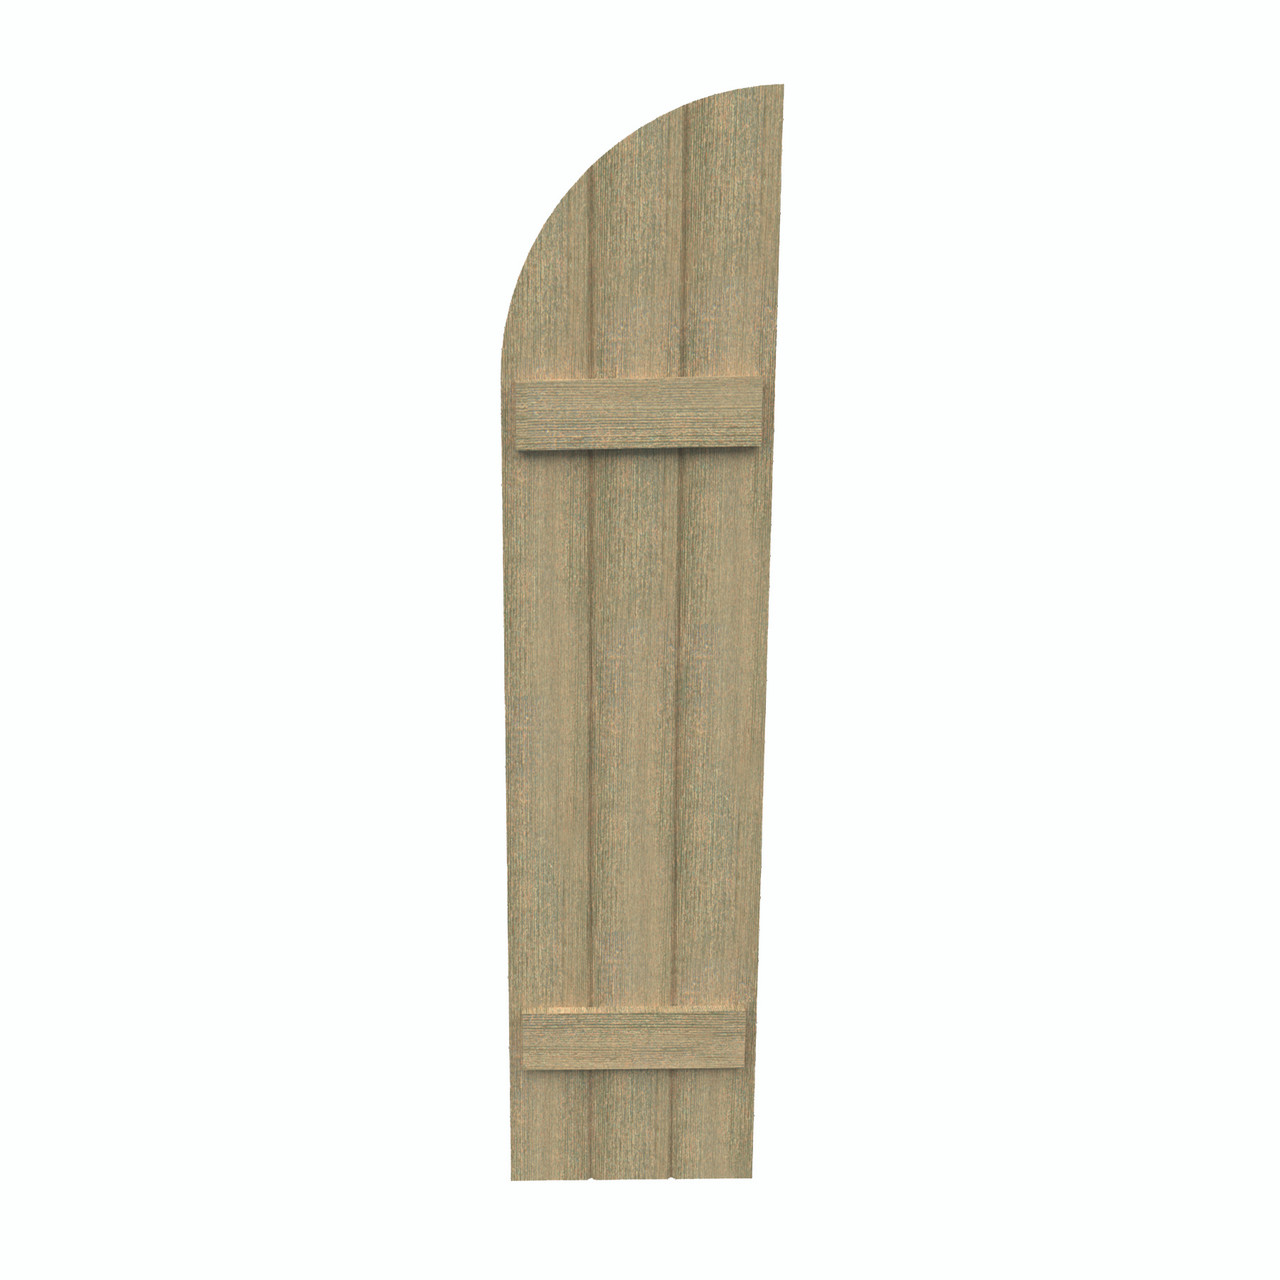 14 inch by 56 inch Quarter Round Shutter with 3-Boards